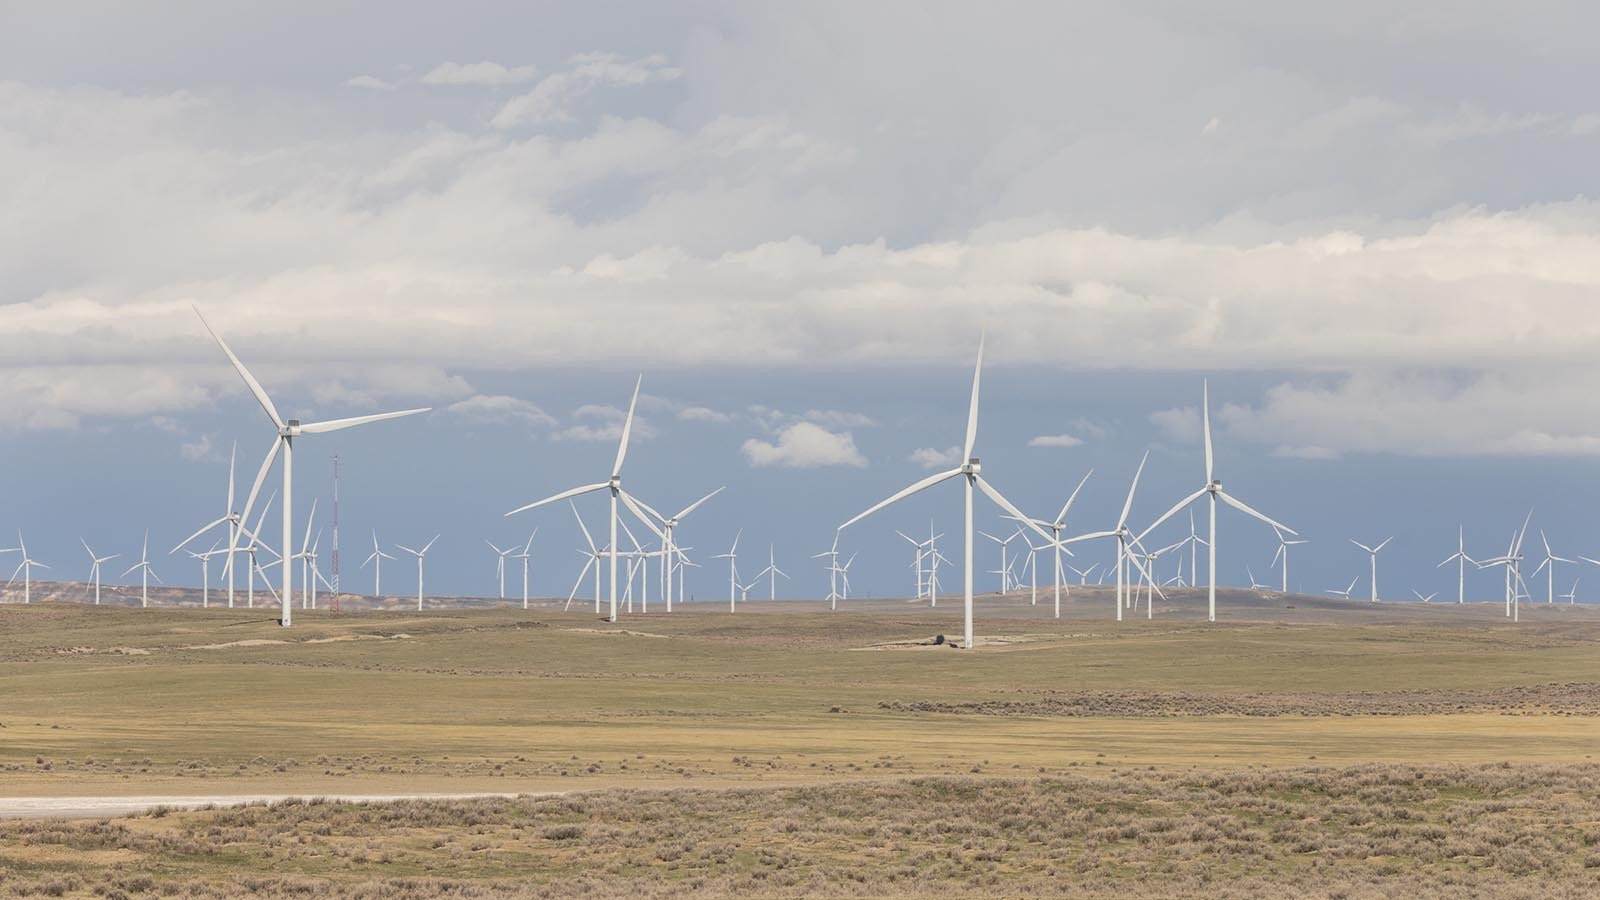 A large wind farm in southern Wyoming near Medicine Bow in this file photo.